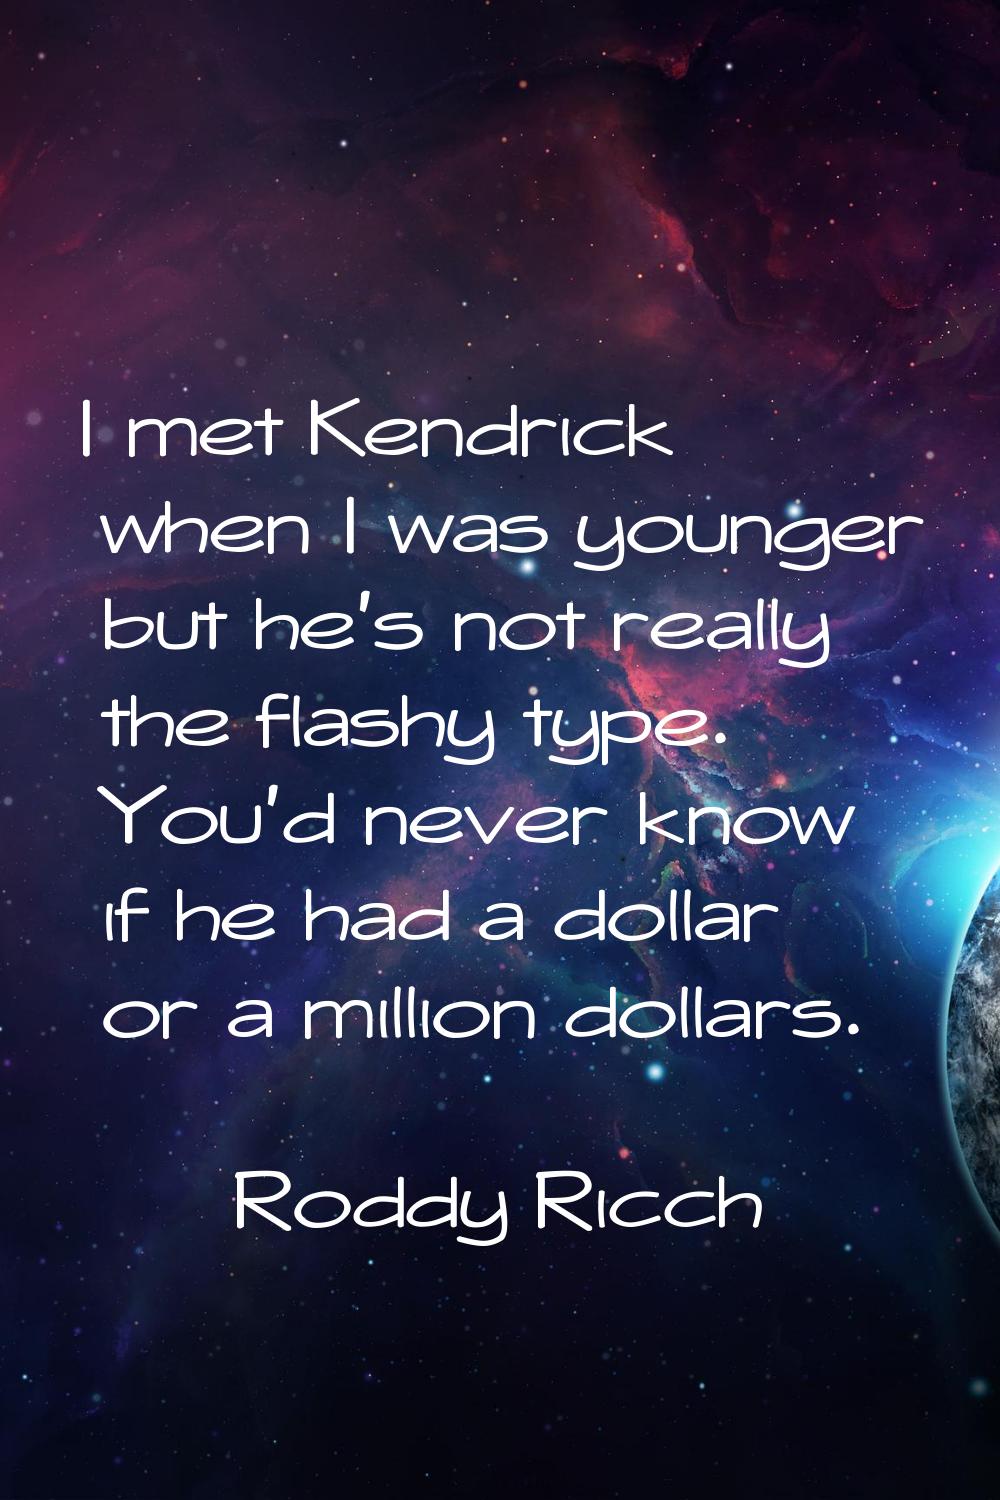 I met Kendrick when I was younger but he's not really the flashy type. You'd never know if he had a